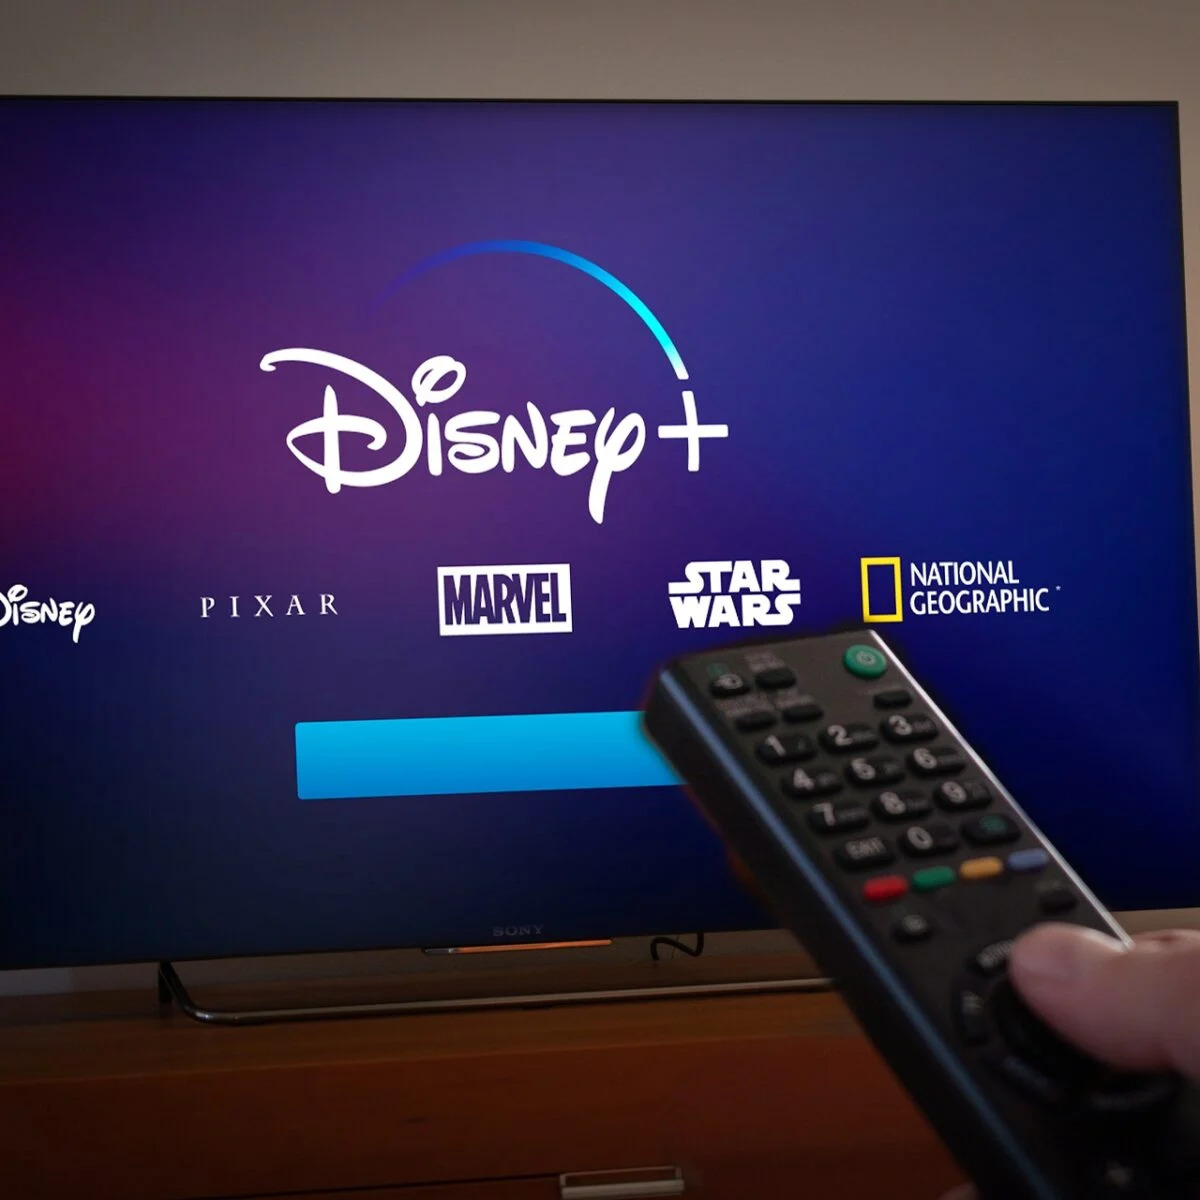 how-to-fix-it-when-disney-plus-is-not-working-on-fire-stick